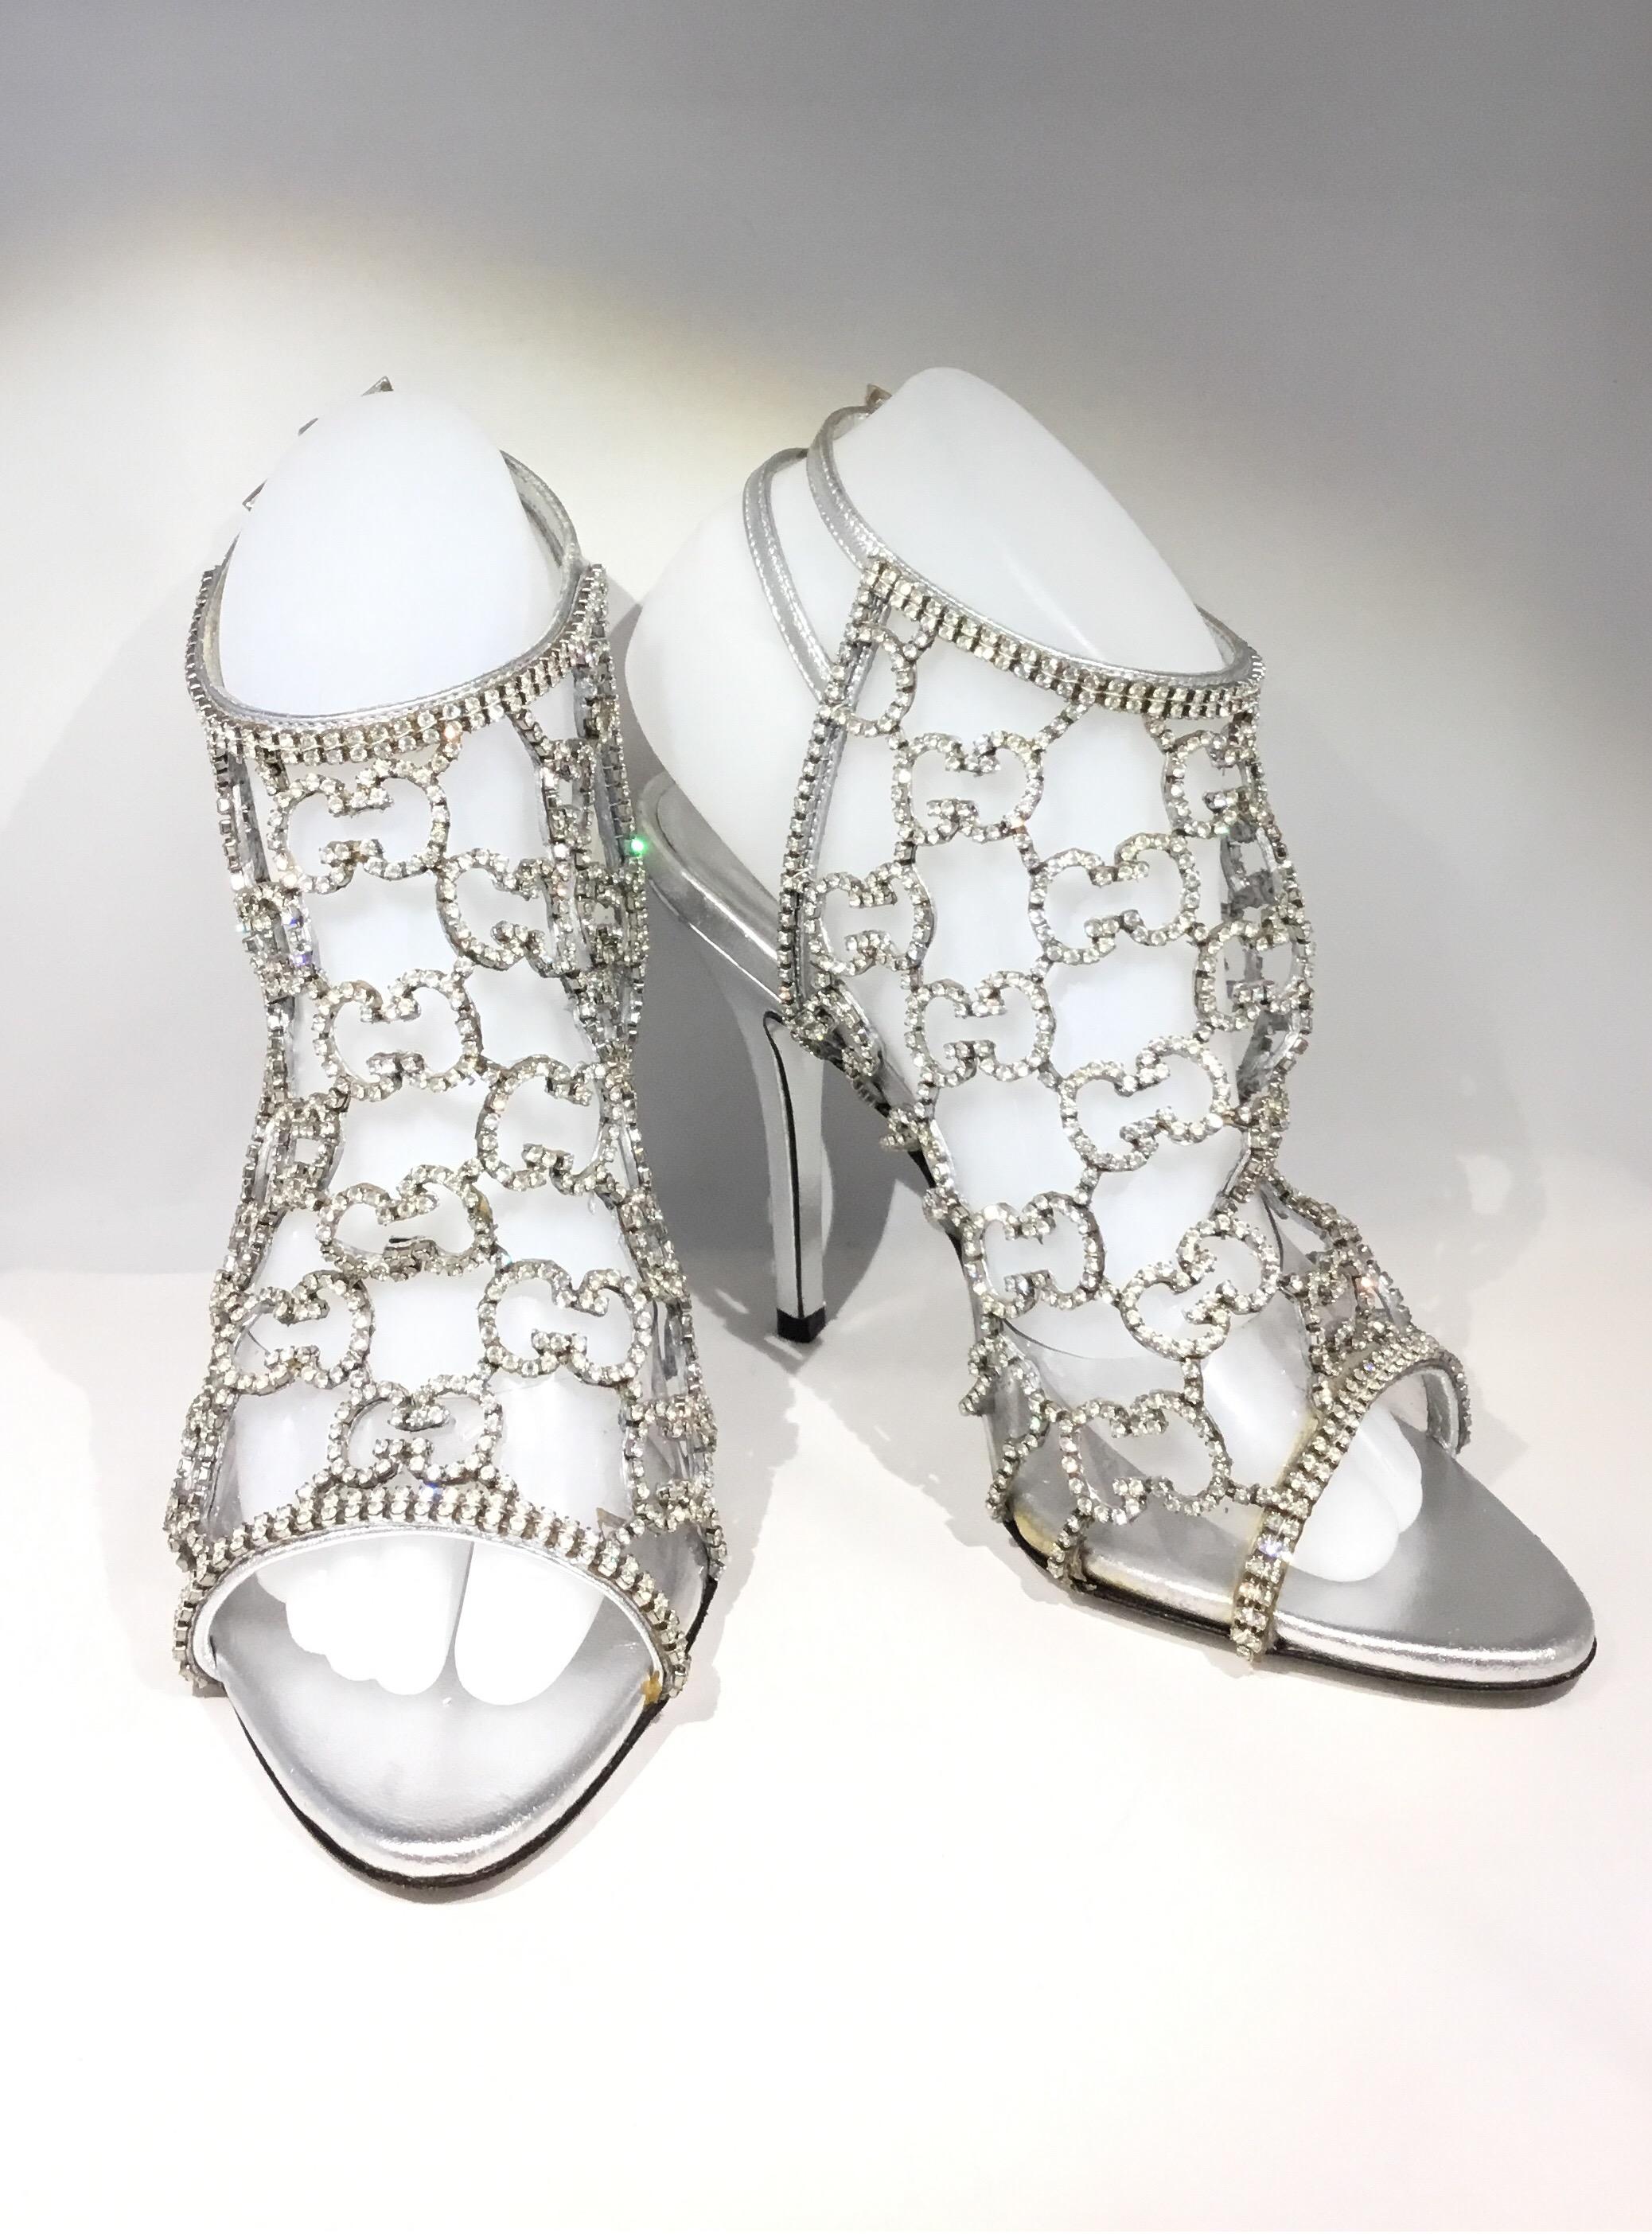 Gucci rhinestone-encrusted Heels featured in silver with its signature GG monogram and dual ankle strap fastenings. Leather soles and insoles. Shoes are labeled size 37 C, made in Italy. Heels have normal wears, see photos. Retail $5k

Heel height